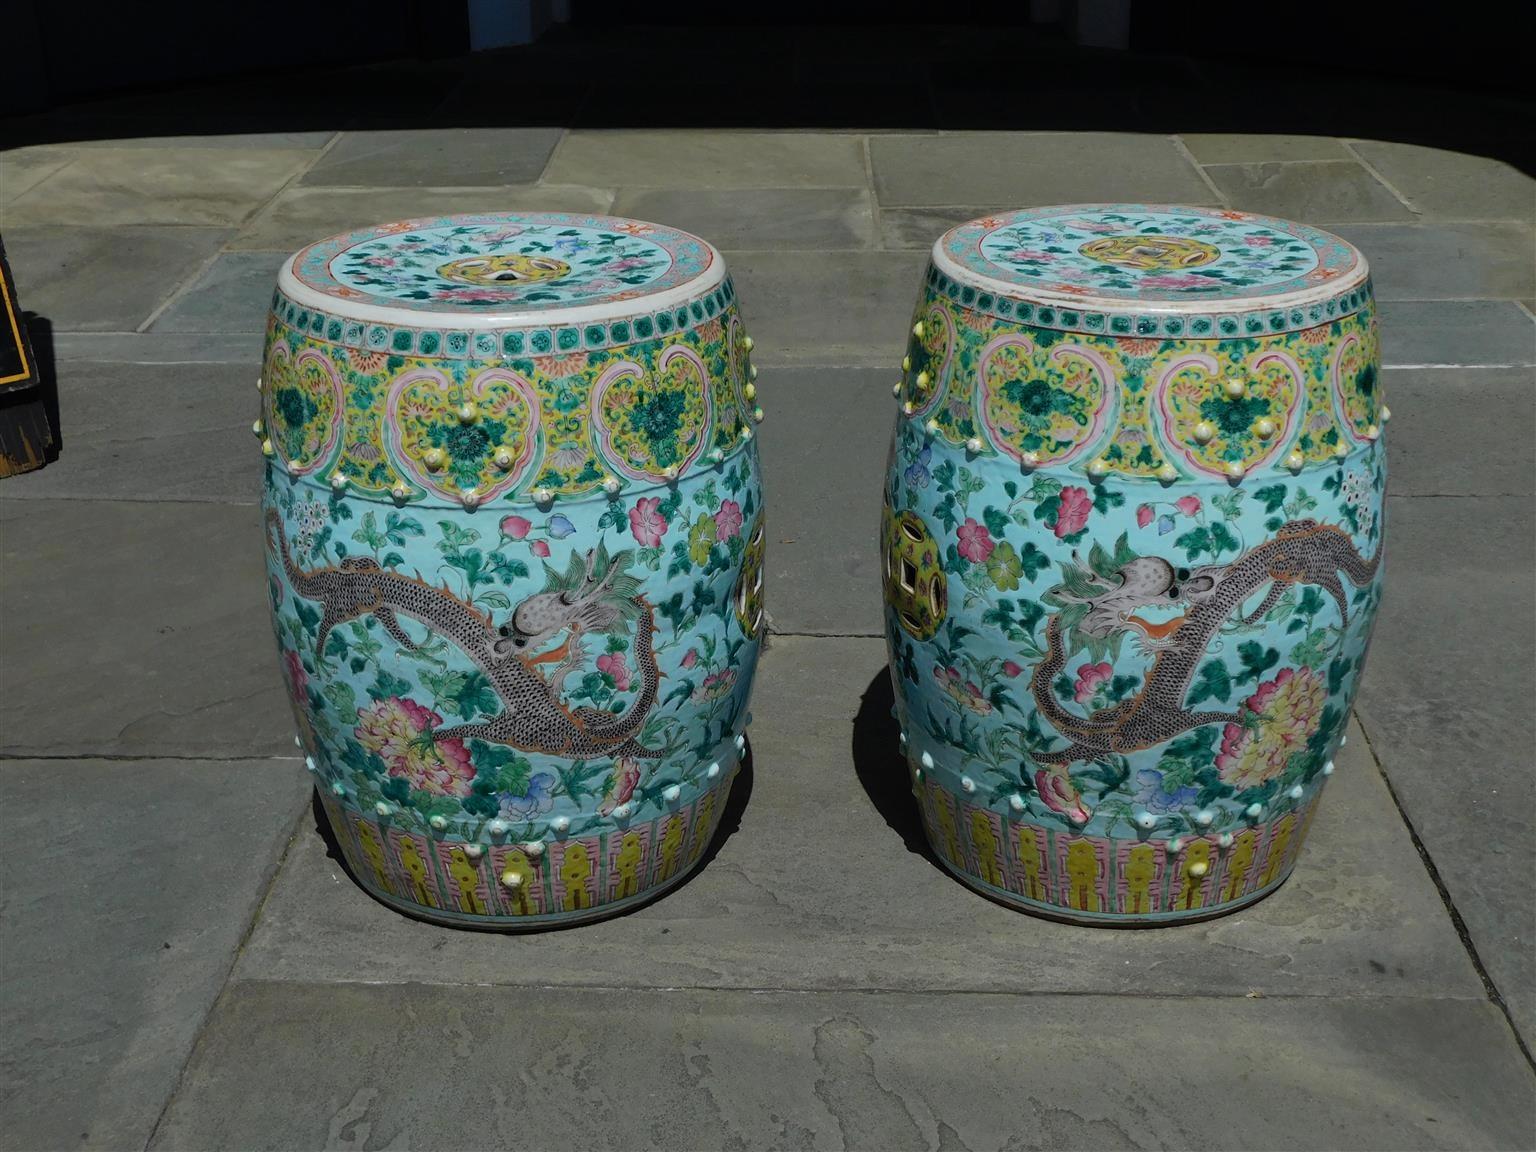 Pair of Chinese Porcelain Painted Garden Seats w/ Dragons & Exotic Birds, C 1820 For Sale 3